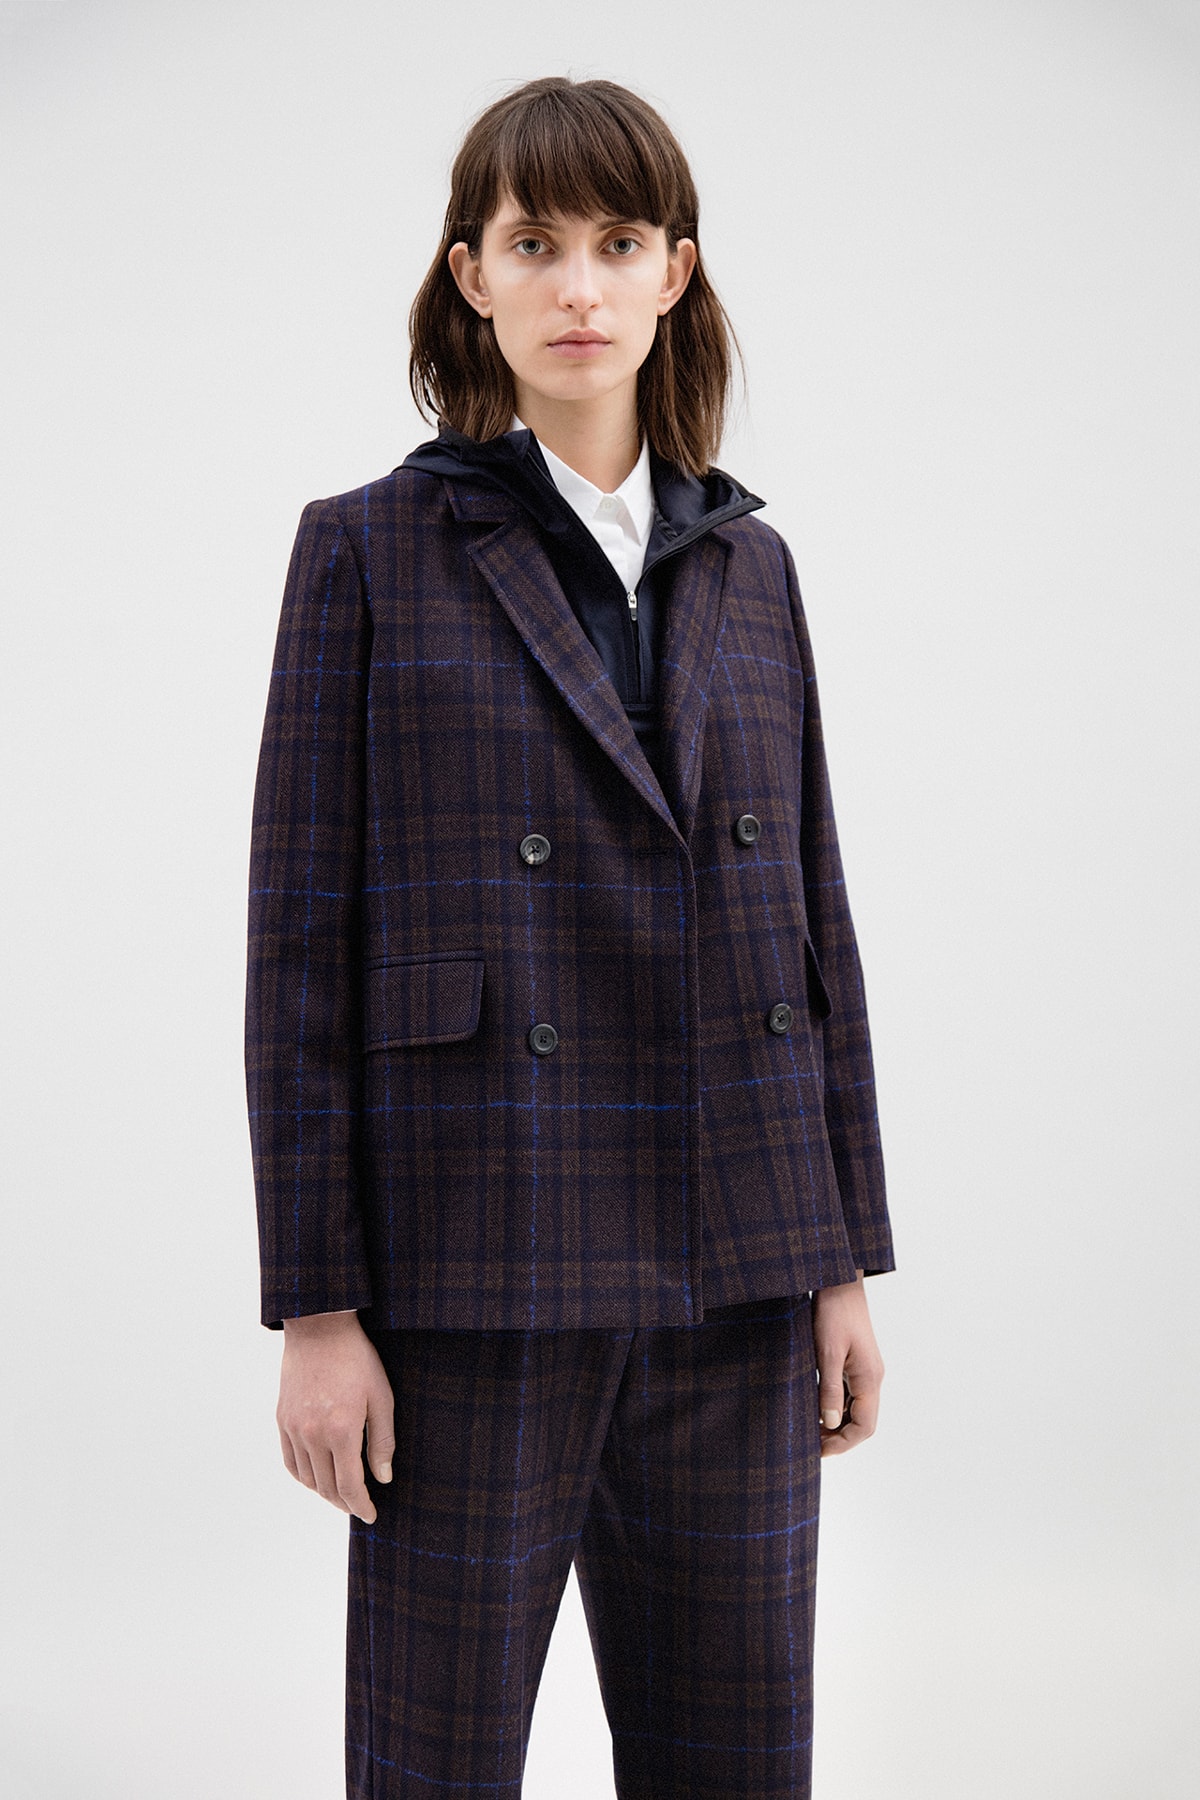 Norse Projects Fall/Winter 2018 Collection Lookbook Gerta Disana Checked Wool Jacket Purple Black